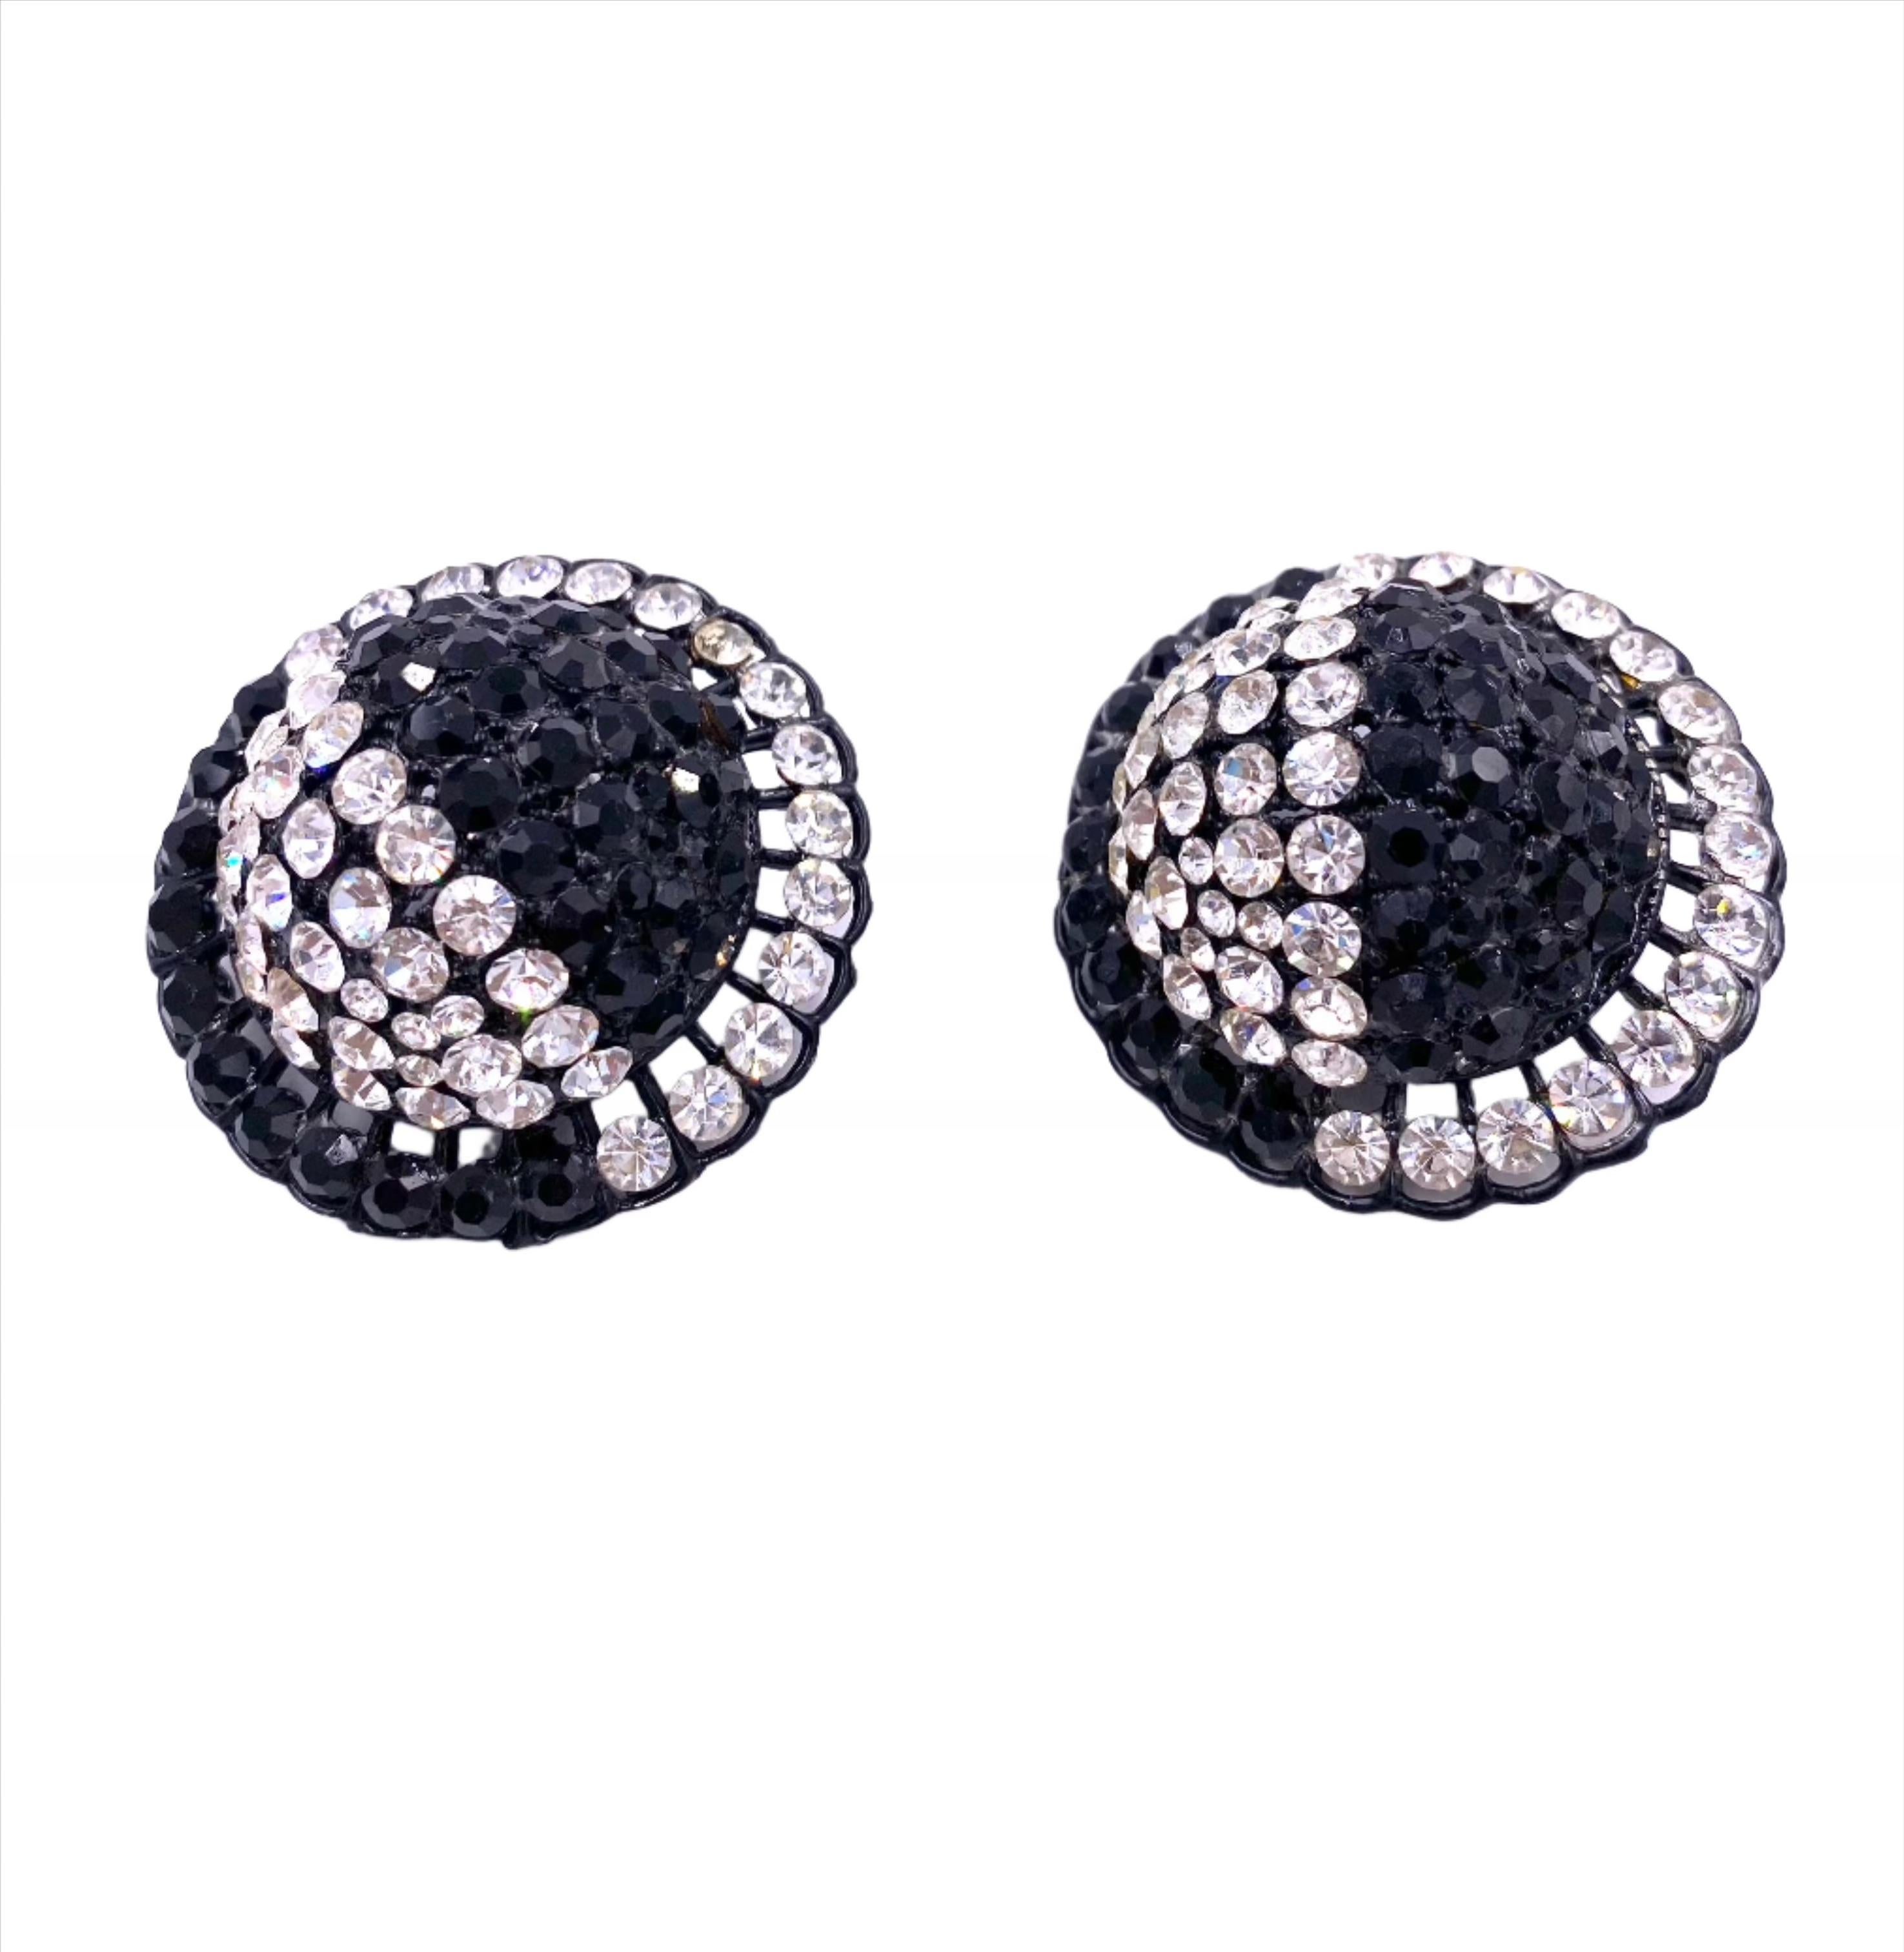 Upgrade your style with our Black/White Round Crystal Clip earrings. These stunning round earrings feature two-tone colors and sparkling rhinestones for a luxurious touch. Add elegance and sophistication to any outfit with these exclusive earrings.